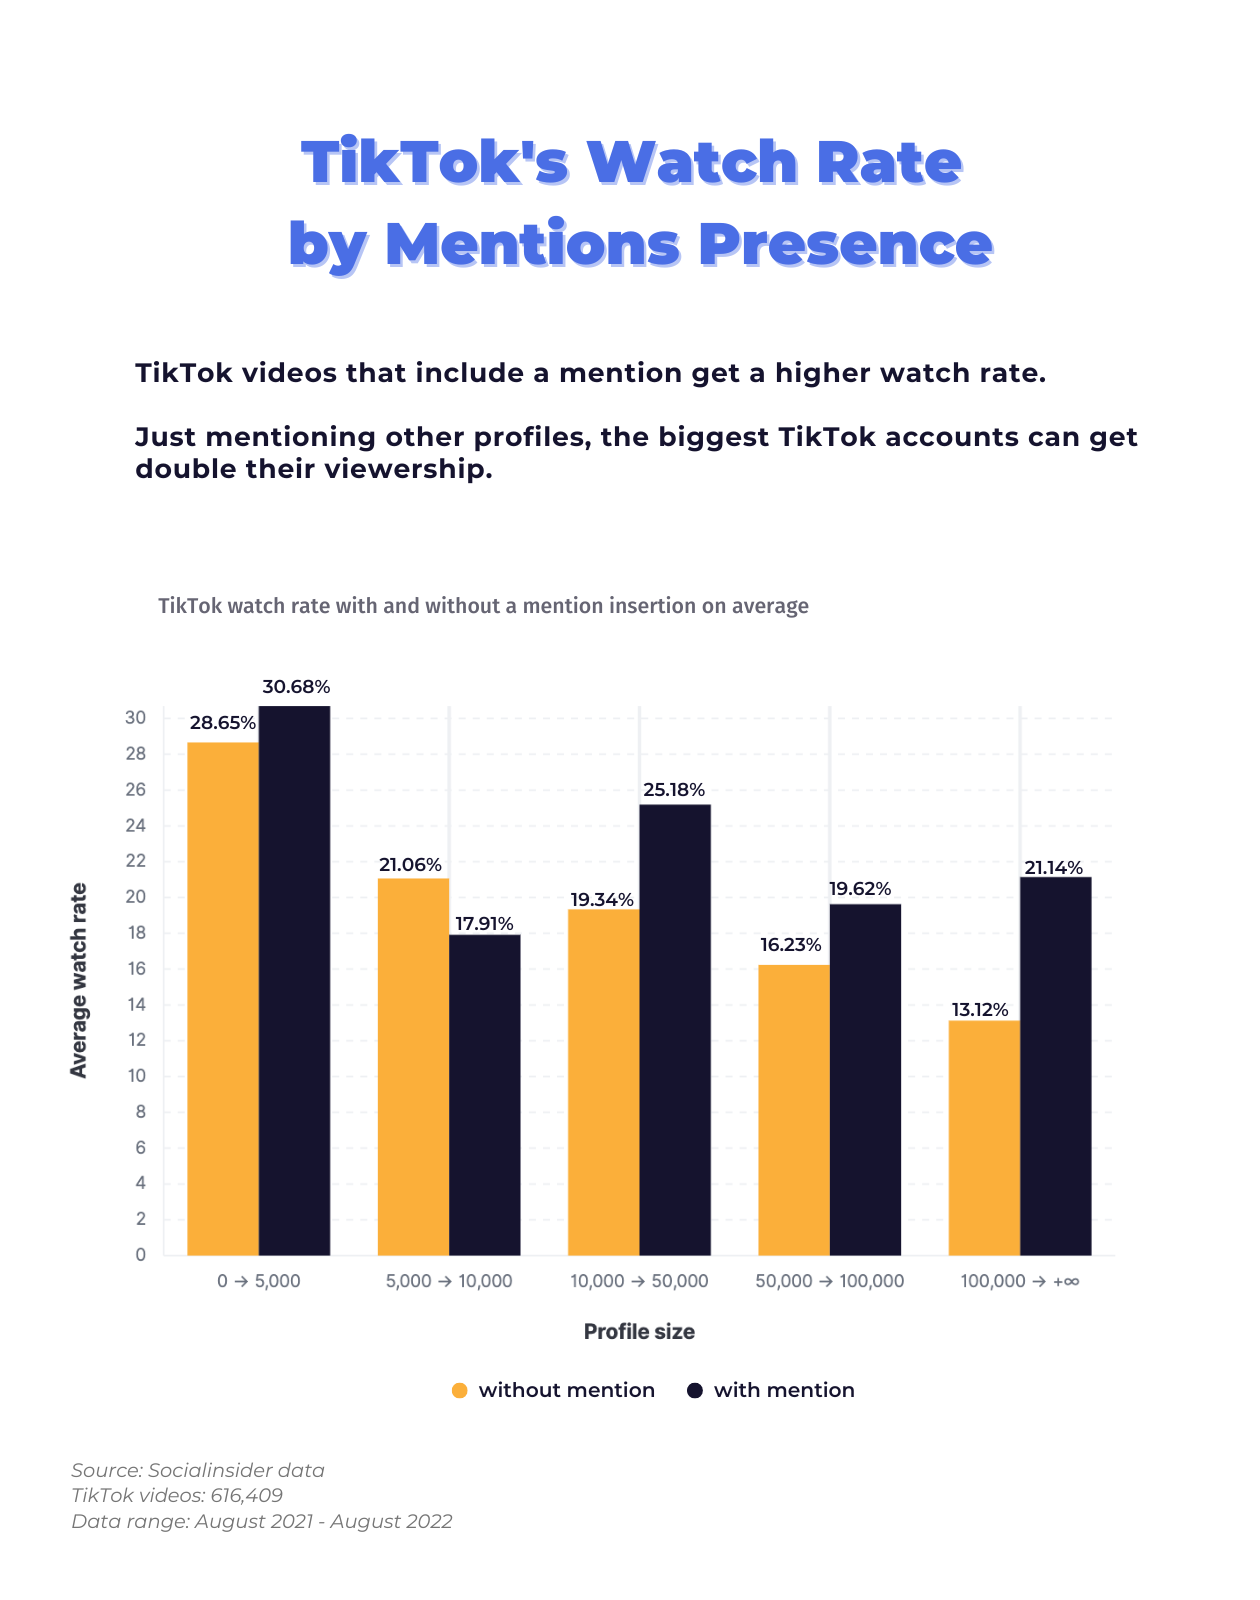 This is a chart indicating how including a mention impacts on TikTok's watch rate.